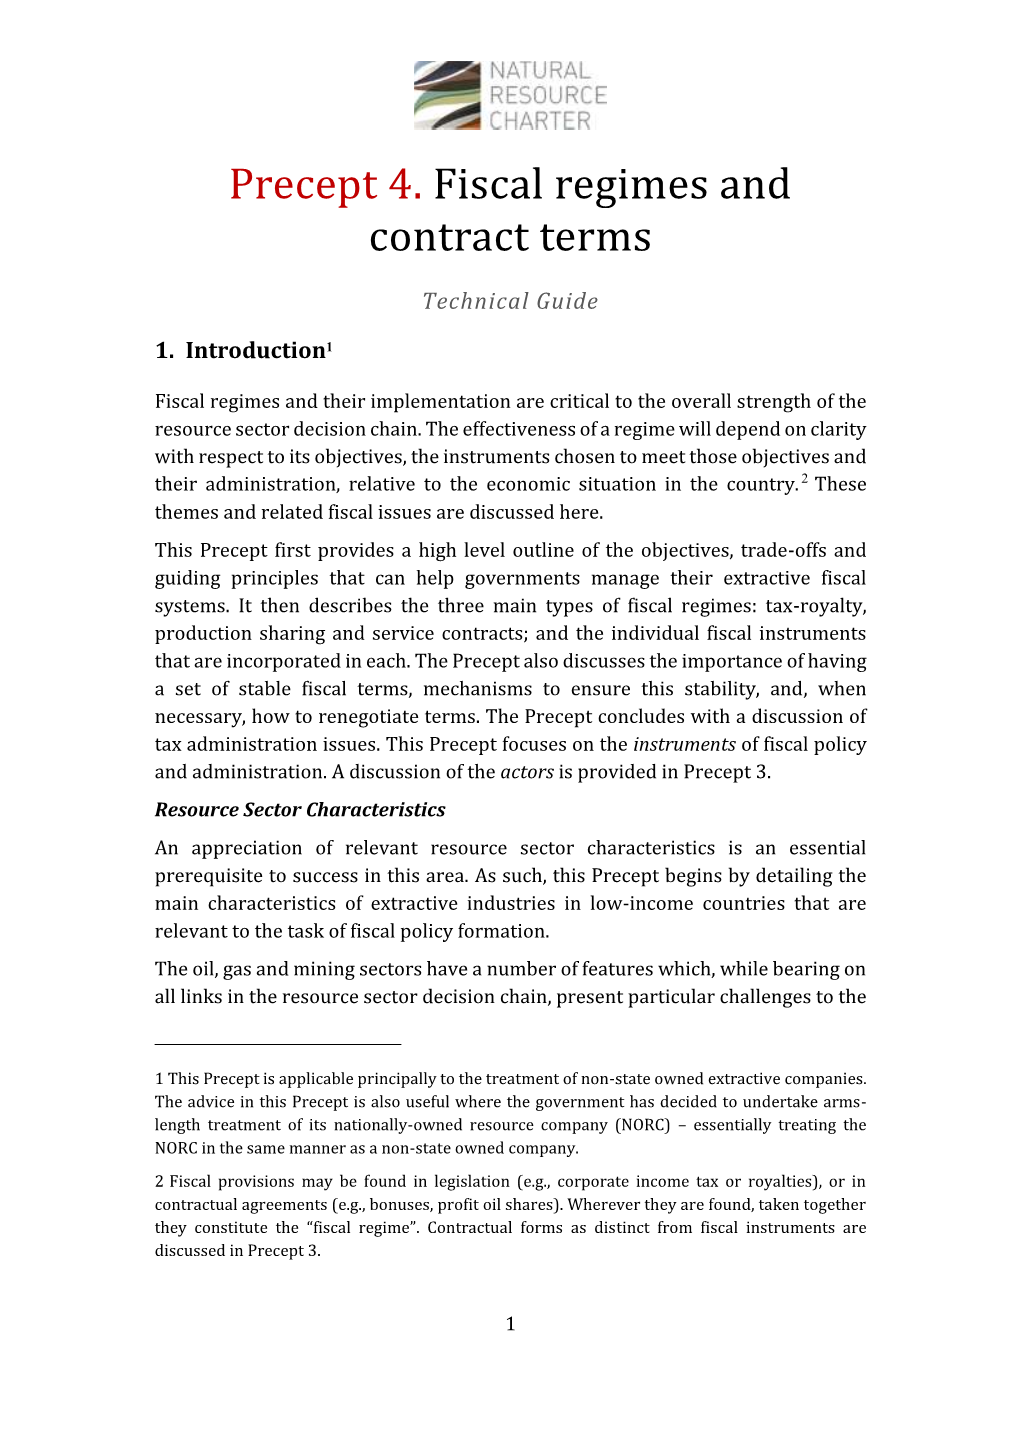 Precept 4. Fiscal Regimes and Contract Terms